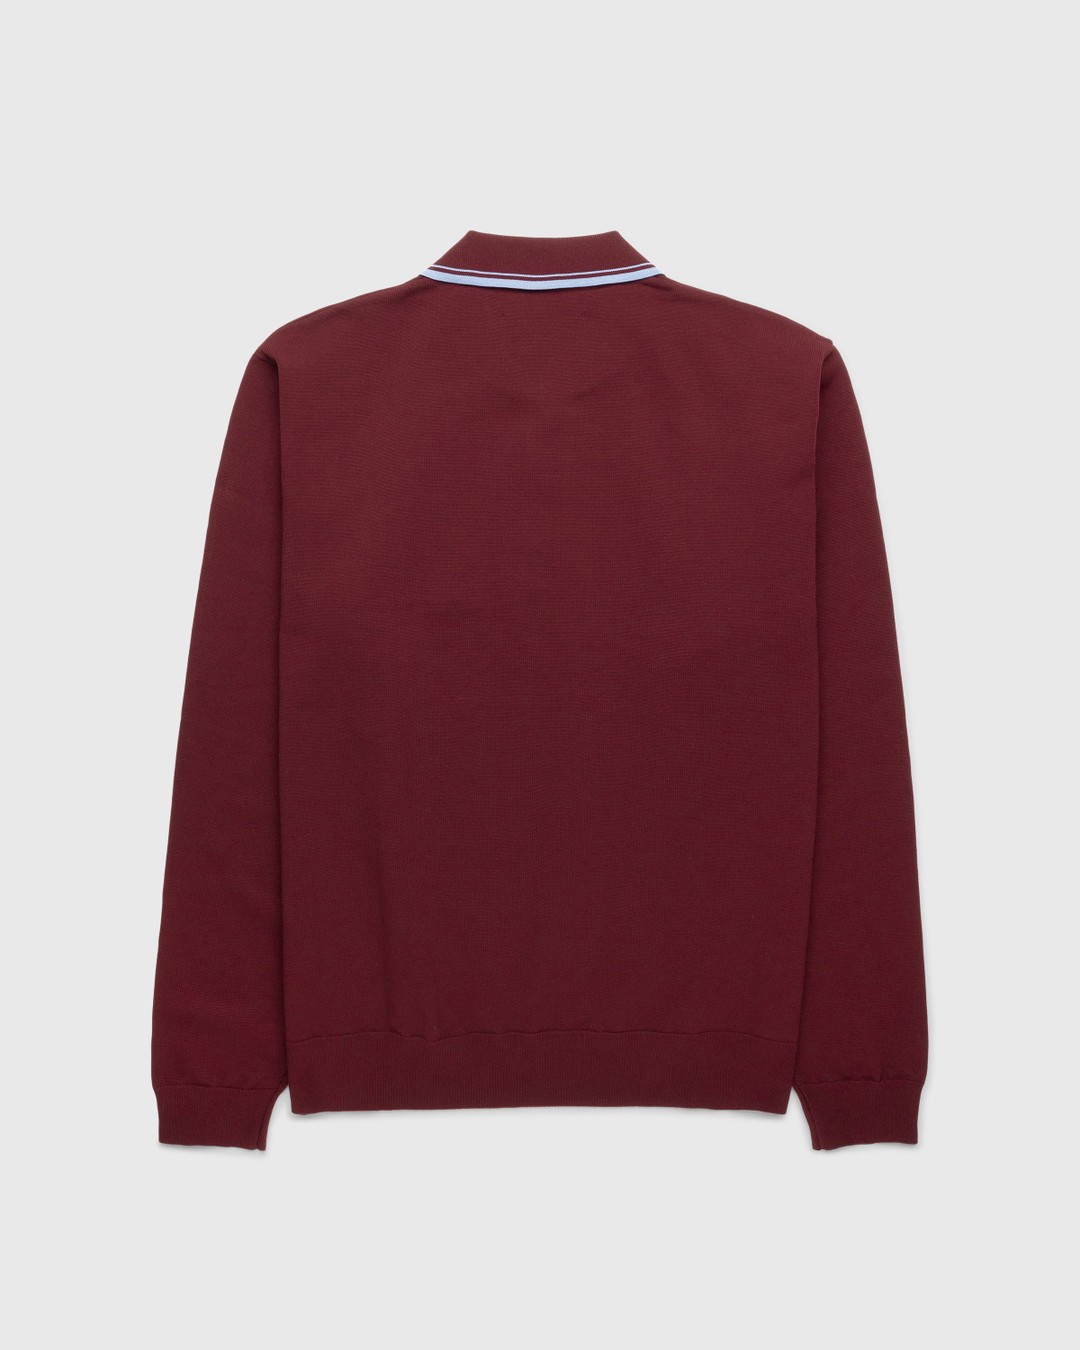 Highsnobiety HS05 – Long Sleeves Knit Polo Bordeaux - Longsleeves - Red - Image 2